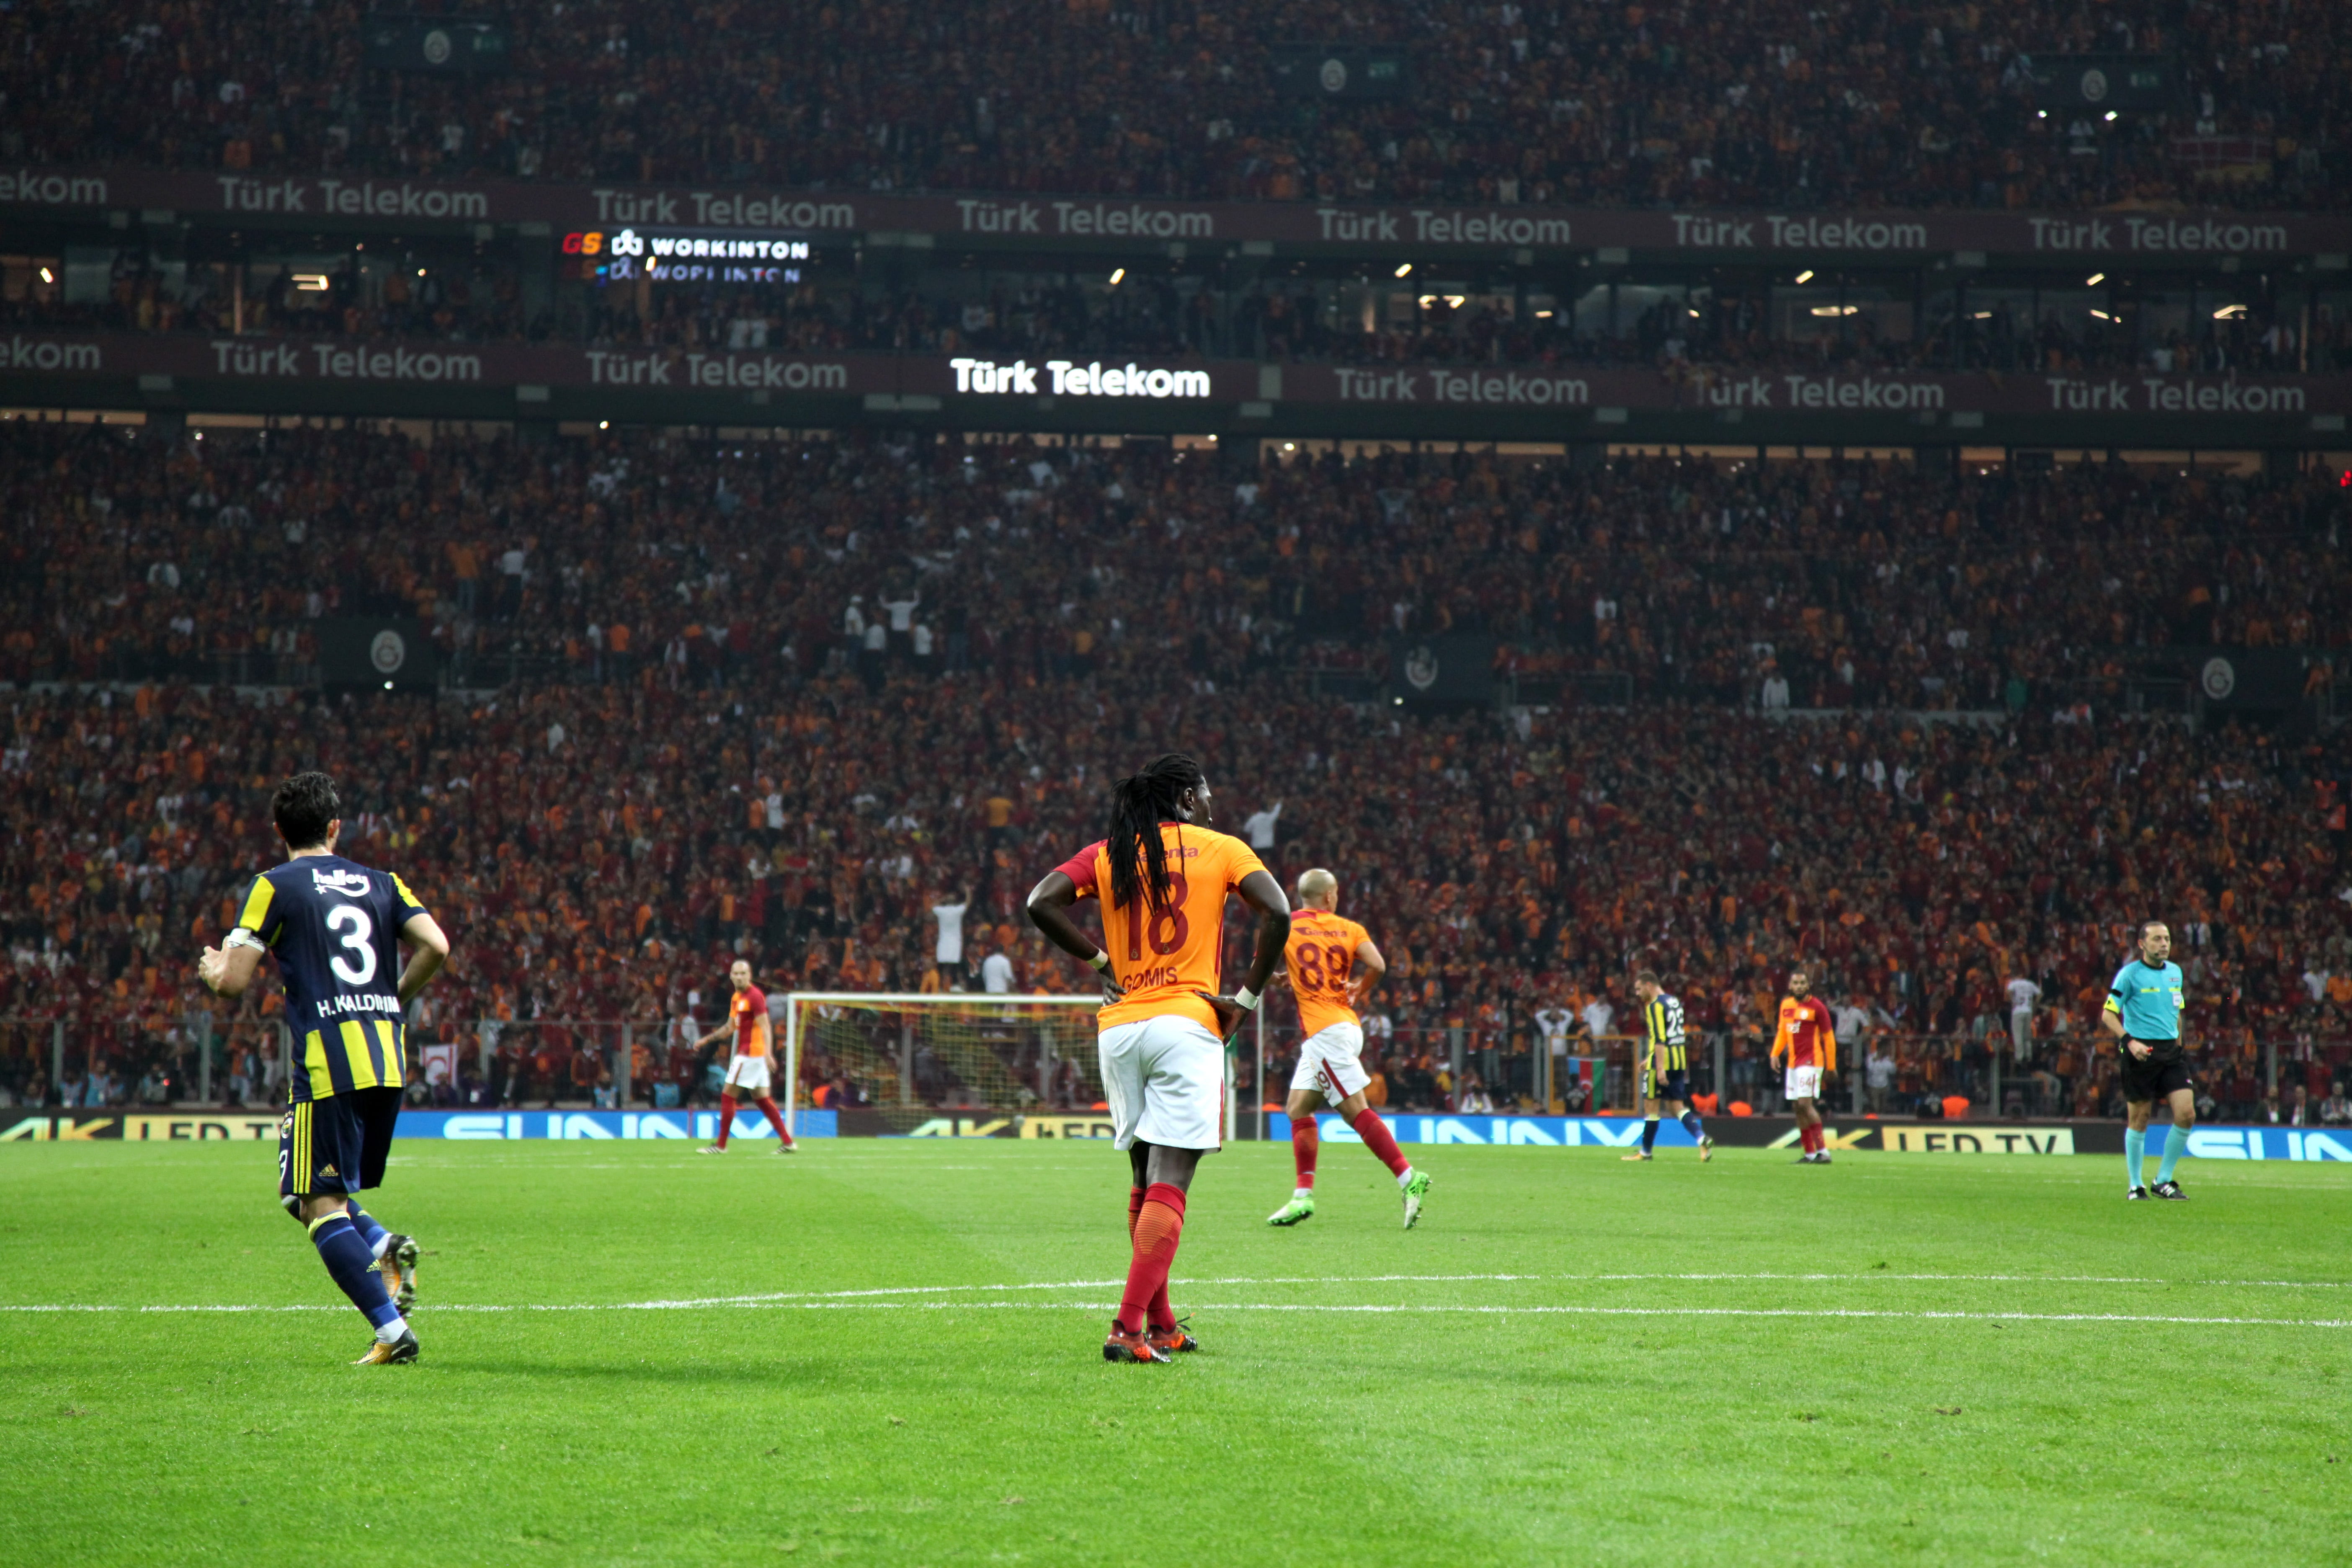 galatasaray, fenerbahce, derby, the audience, super league